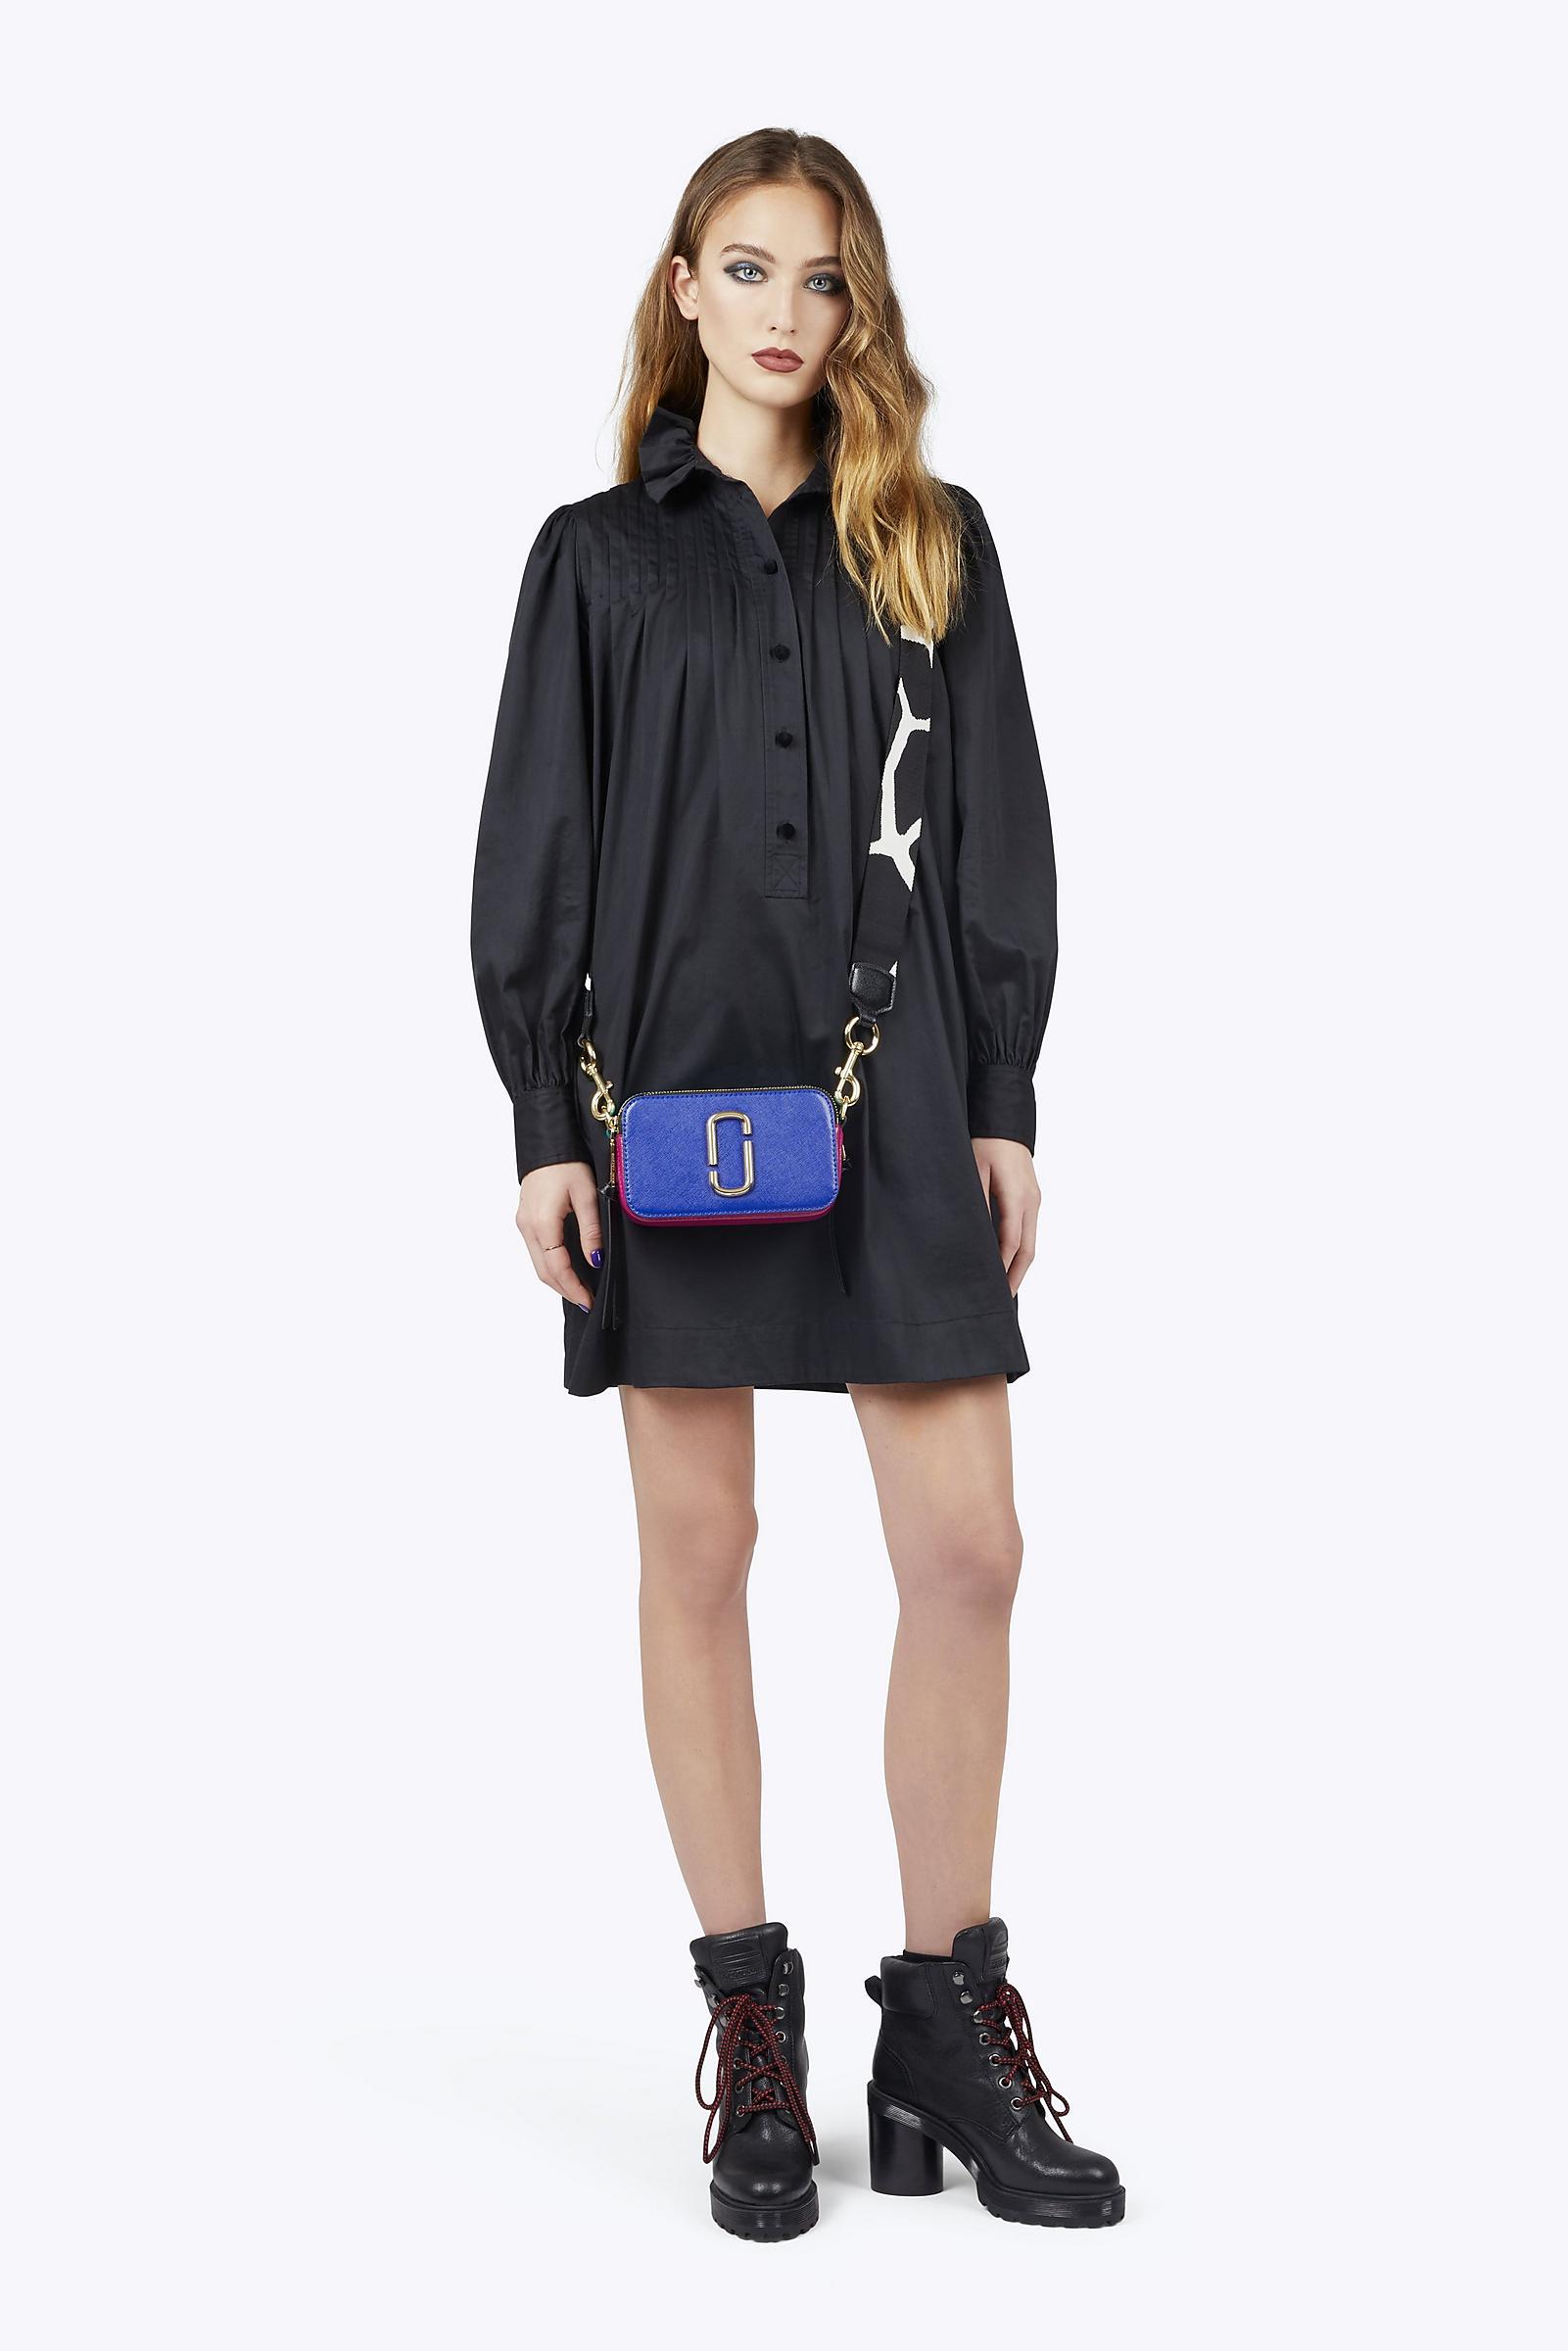 Marc Jacobs Snapshot Small Camera Bag in Academy Blue